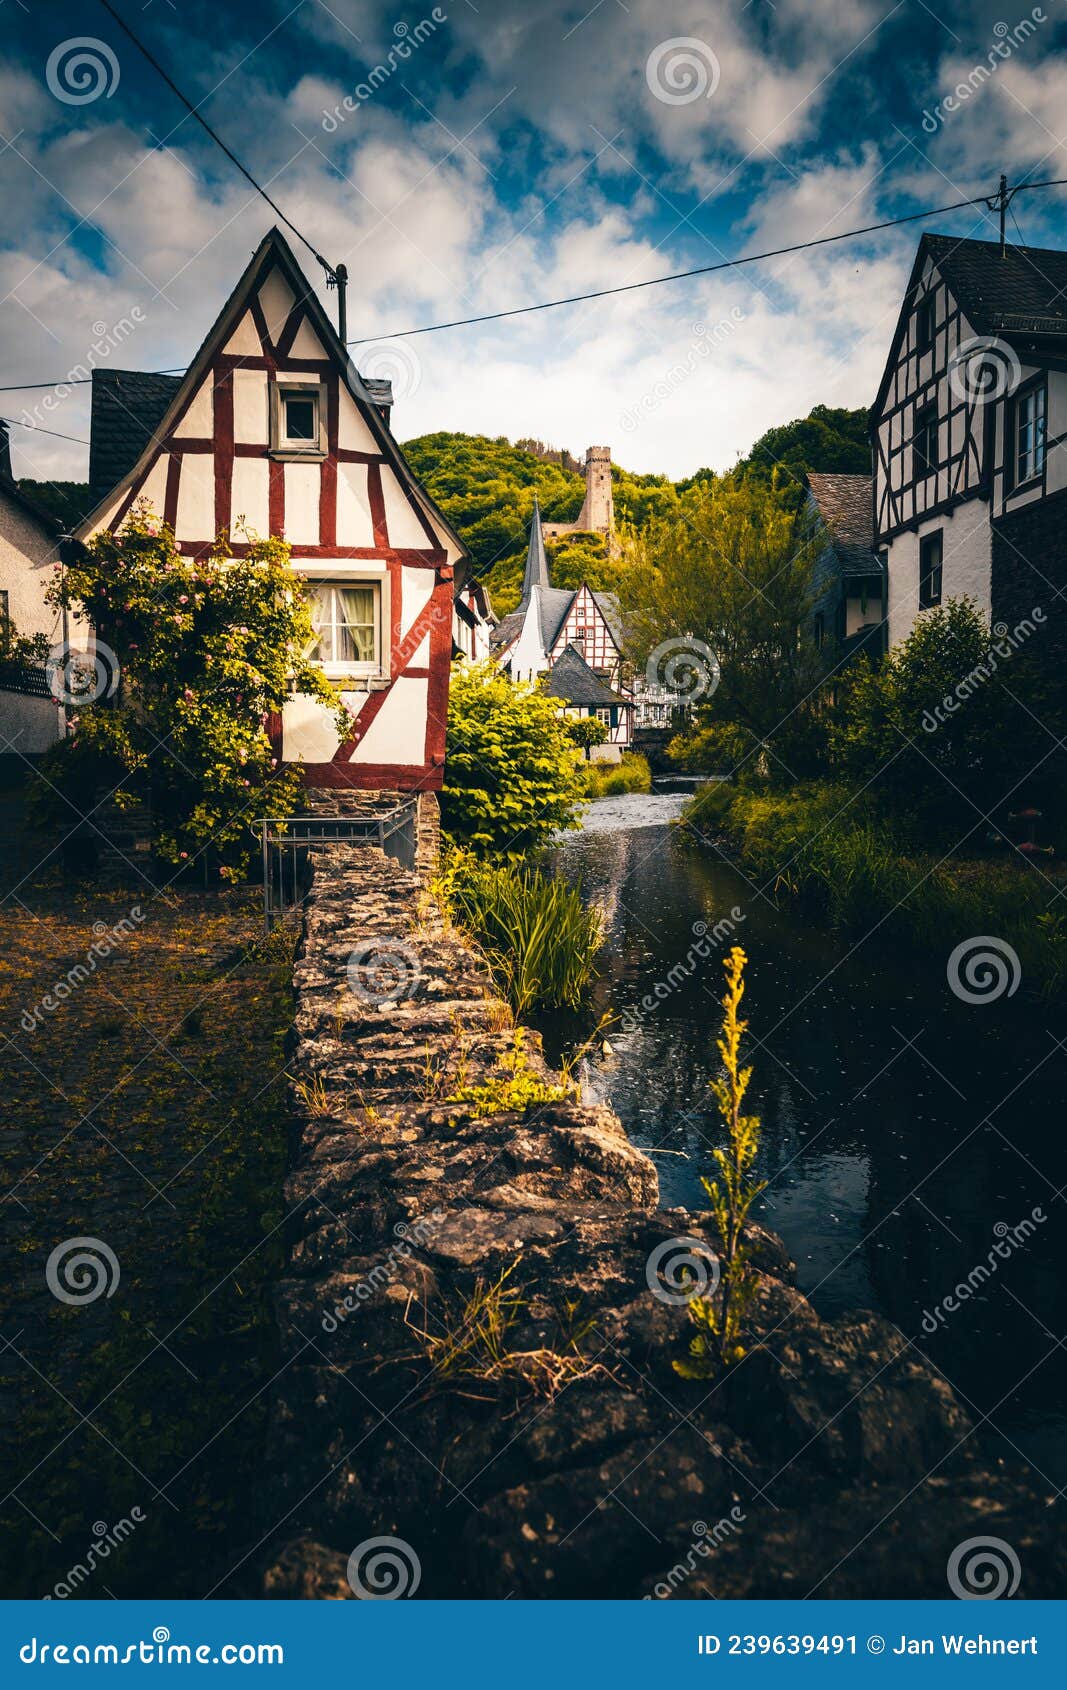 the beautiful and enchanted village of monreal am elzbach with german half-timbered houses